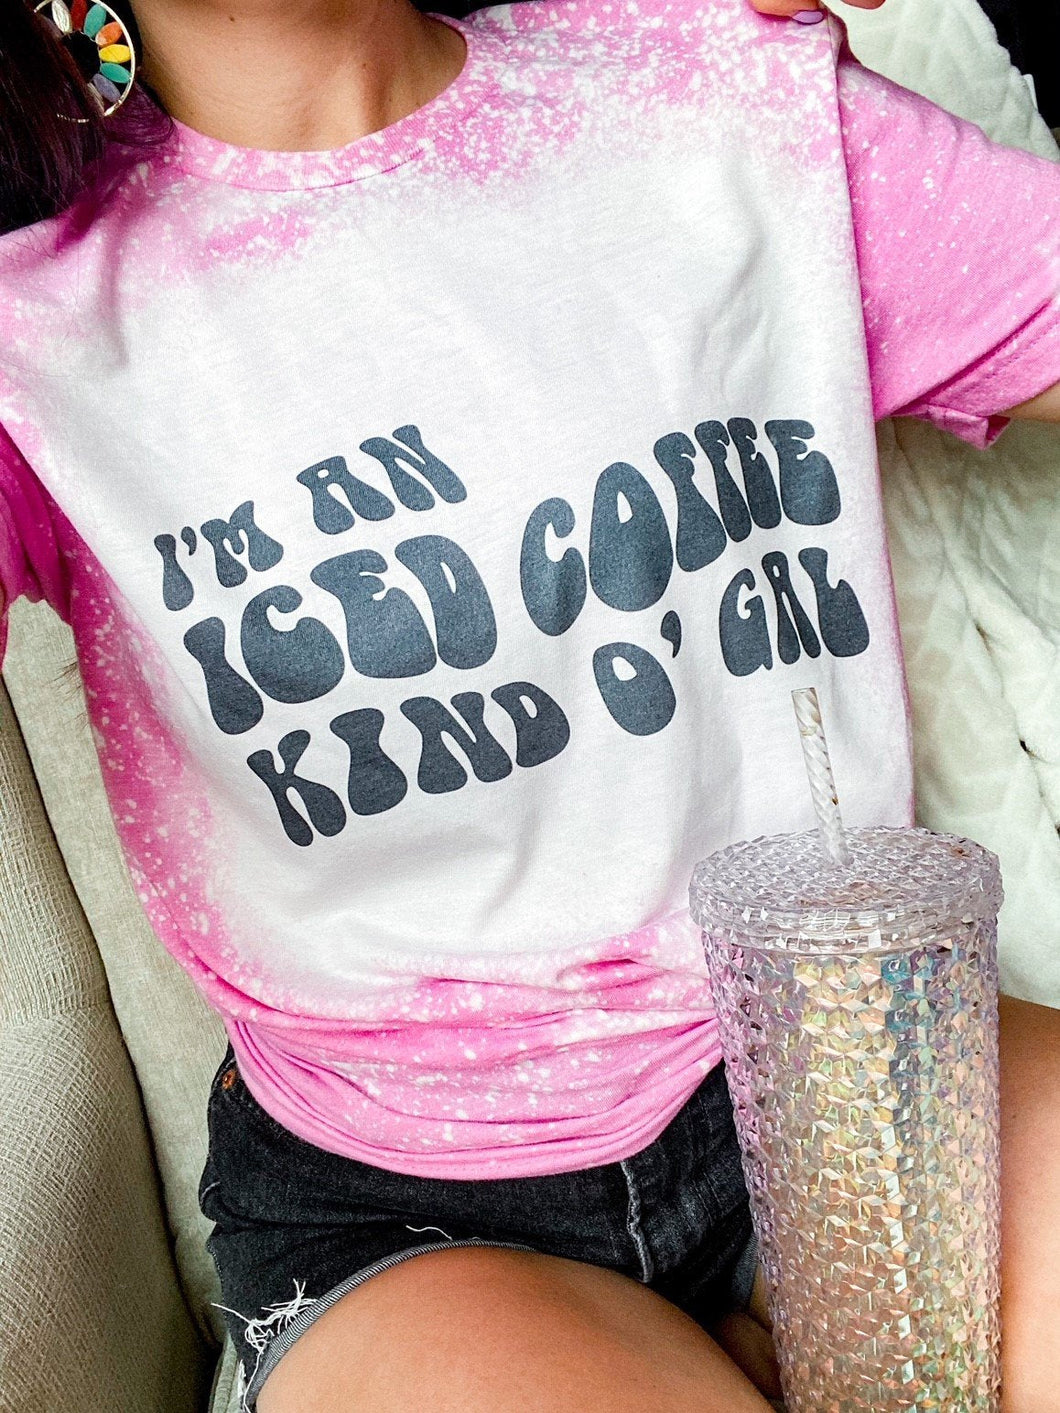 Iced Coffee Kind O'Gal Pink Bleached Graphic Tee